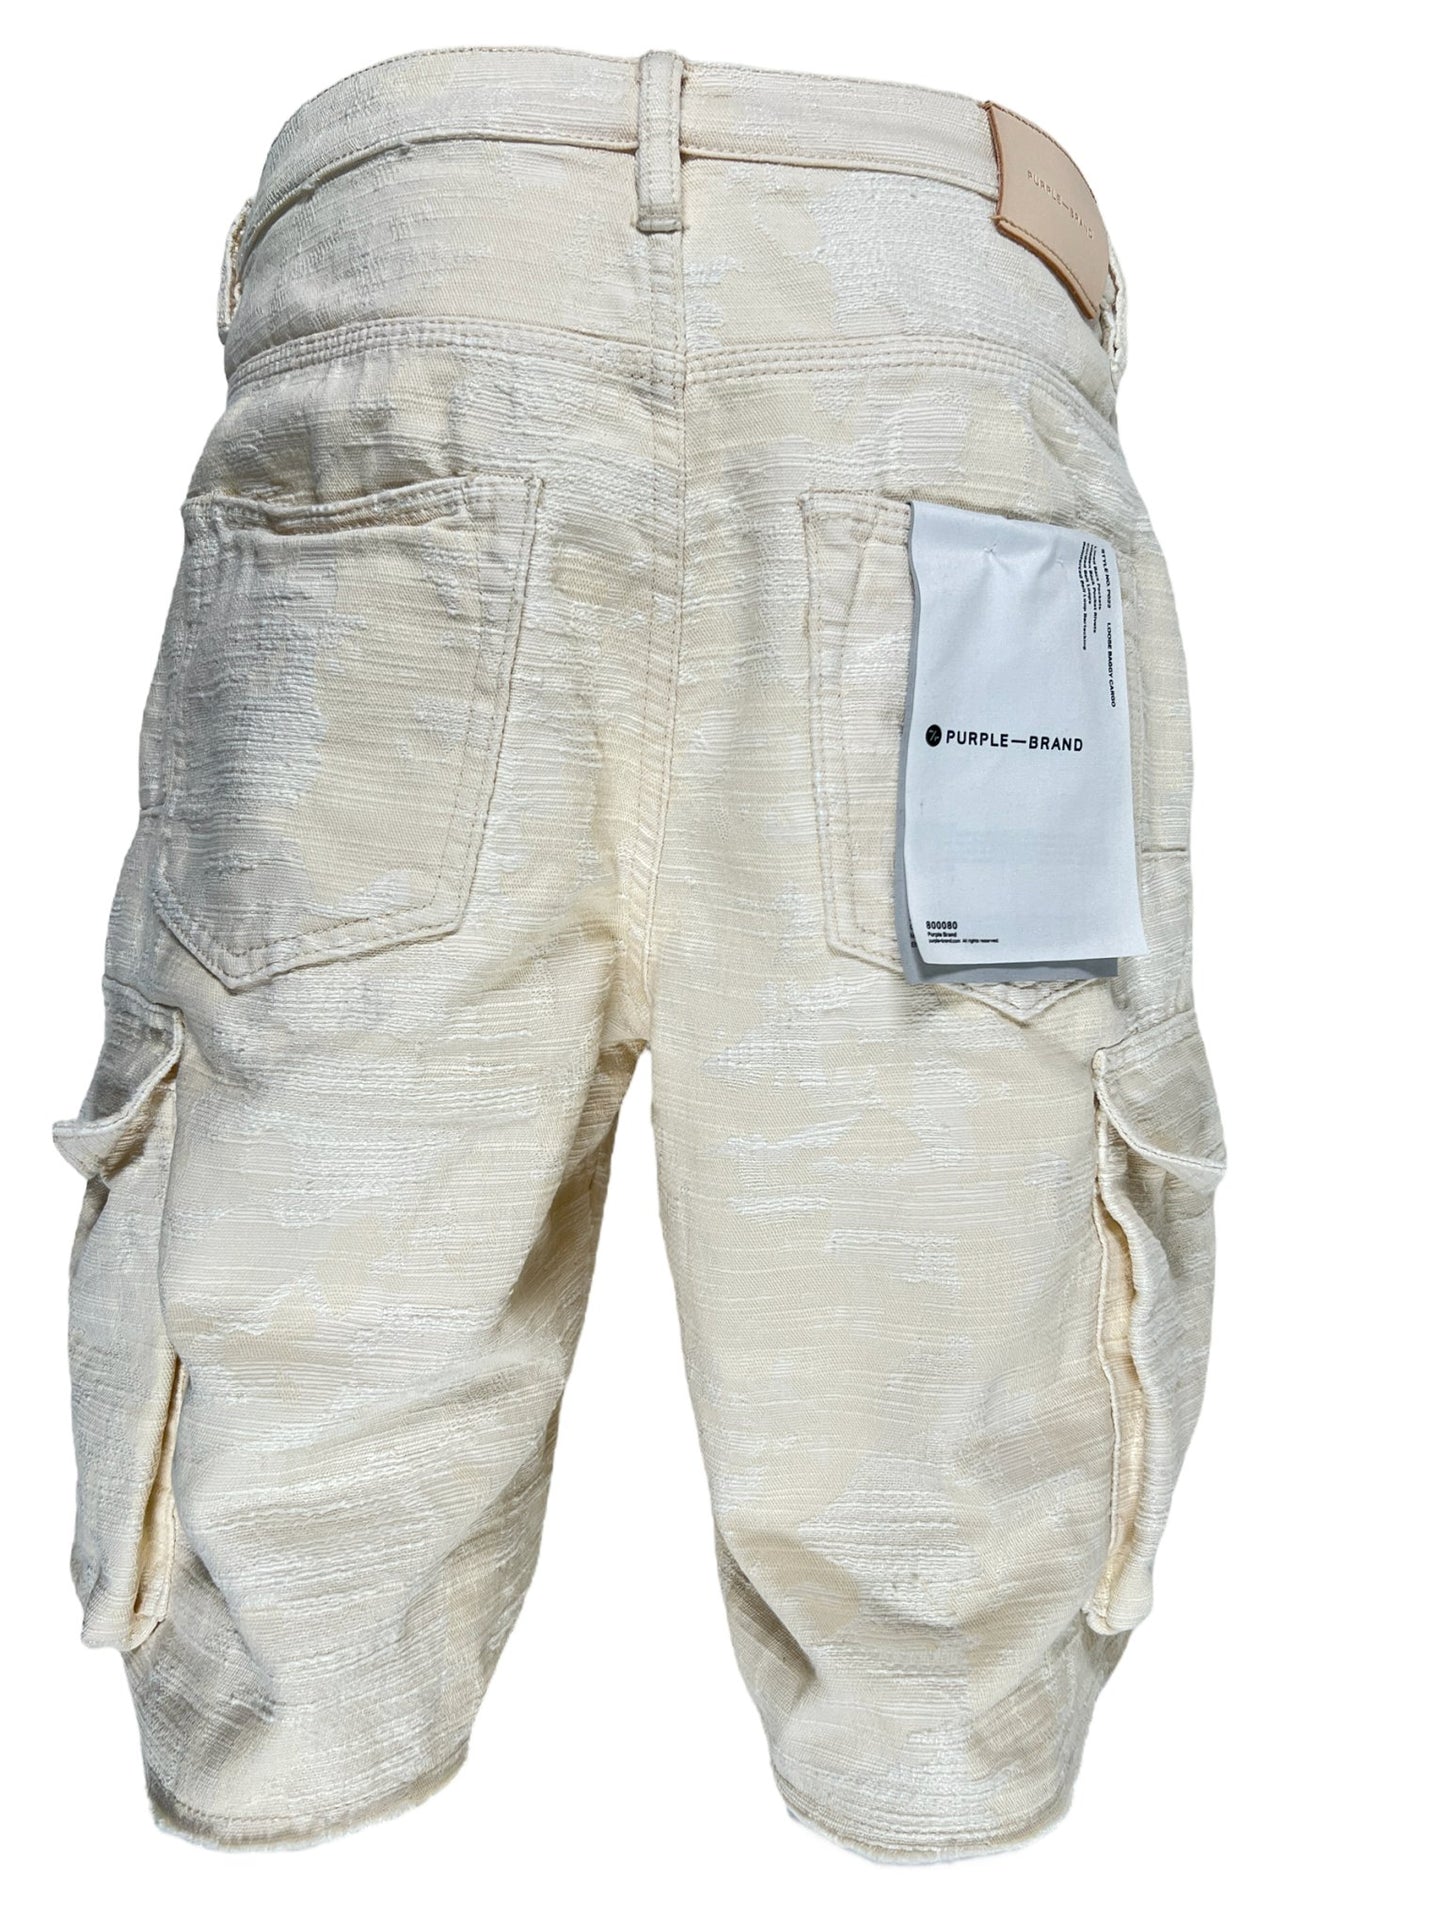 A pair of Purple Brand P022-JCSW jacquard cargo shorts in ivory with a tag on the back.